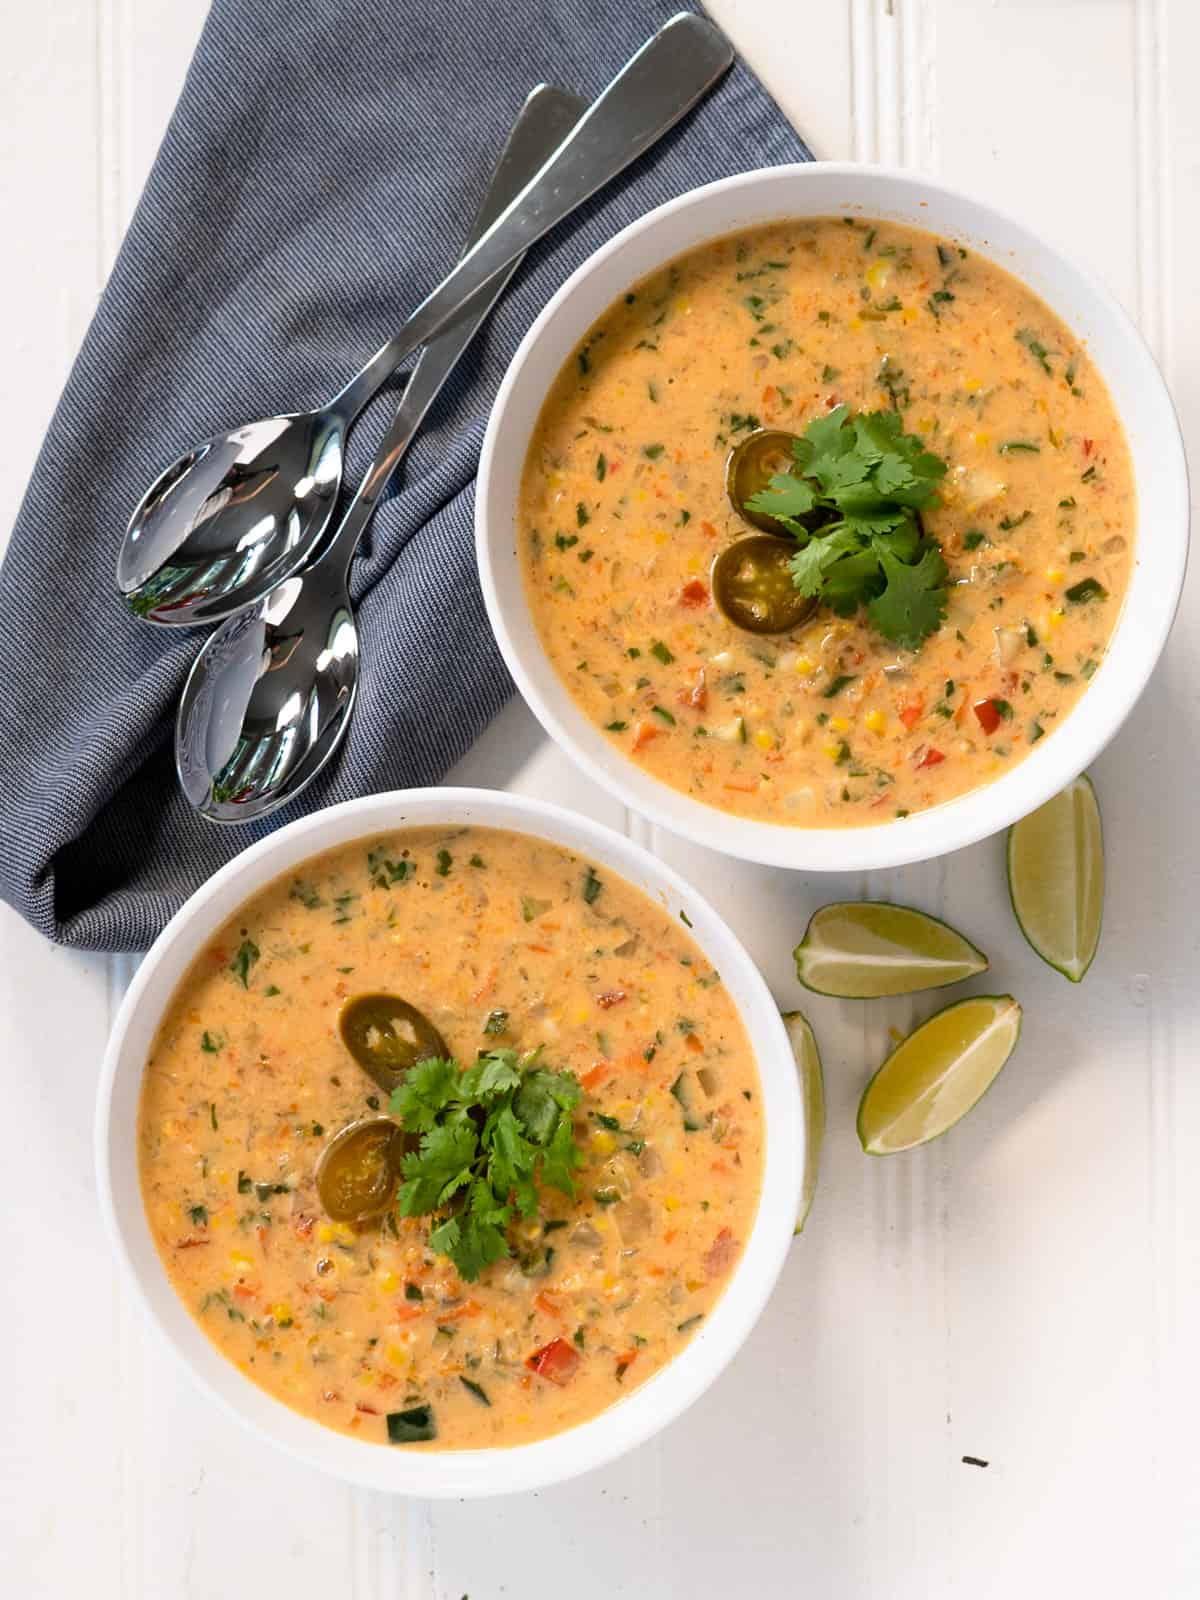 2 white bowls of prepared soup topped with cilantro and jalapenos. Lime wedges on the side.